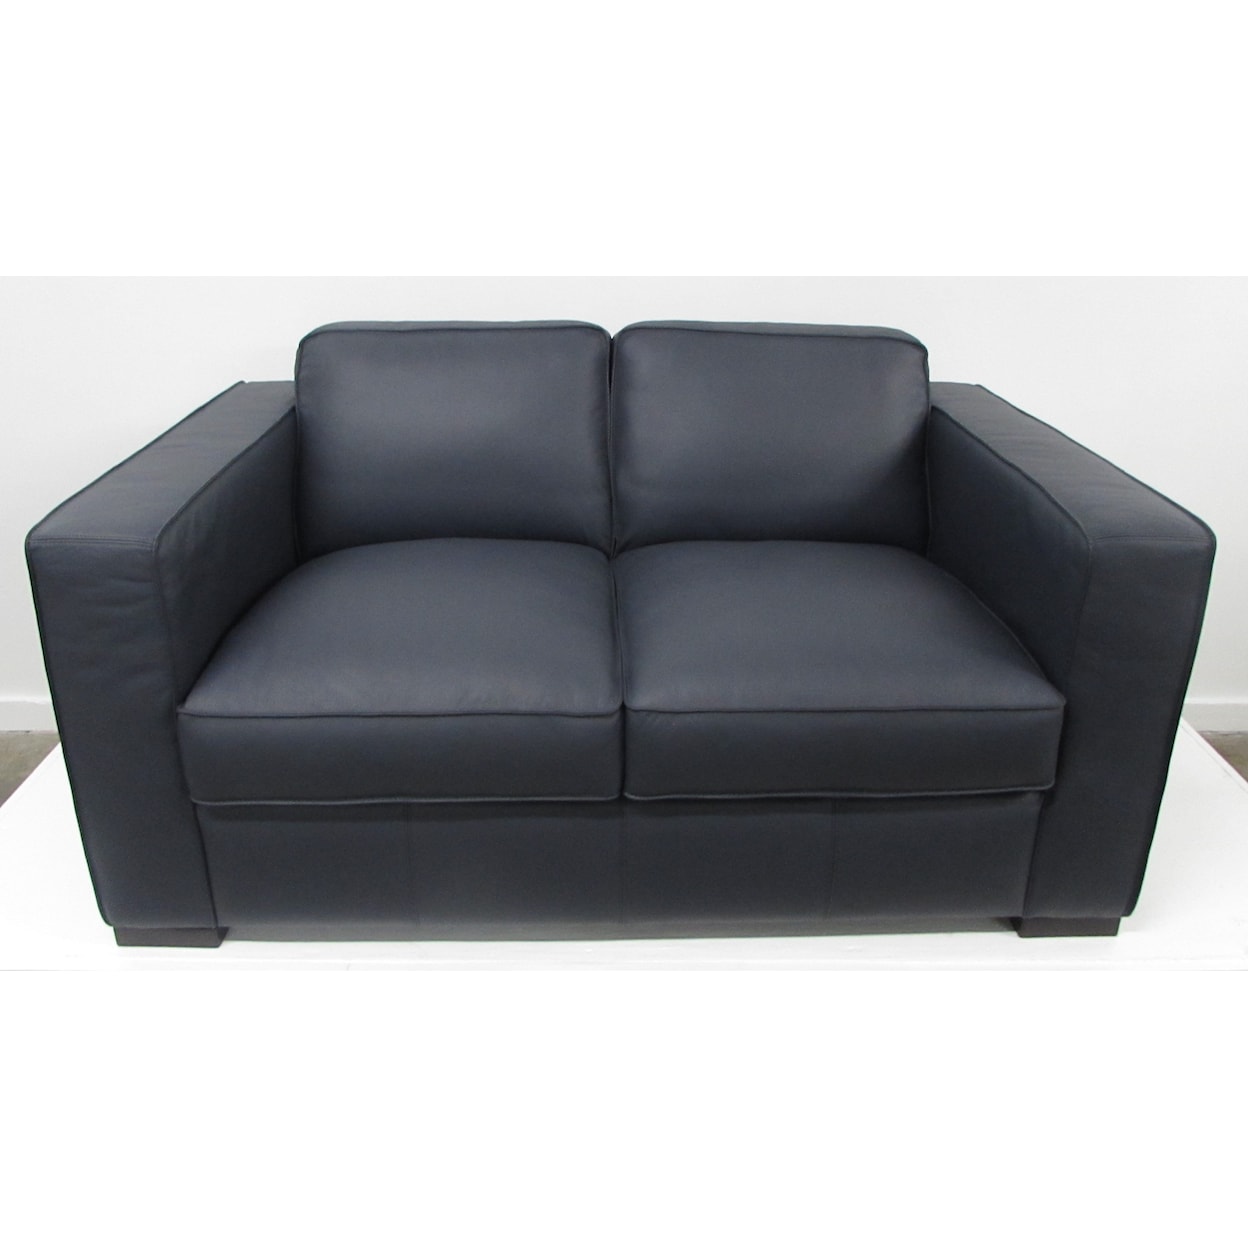 Natuzzi Editions C274 Leather Collection C274 Navy Leather Loveseat